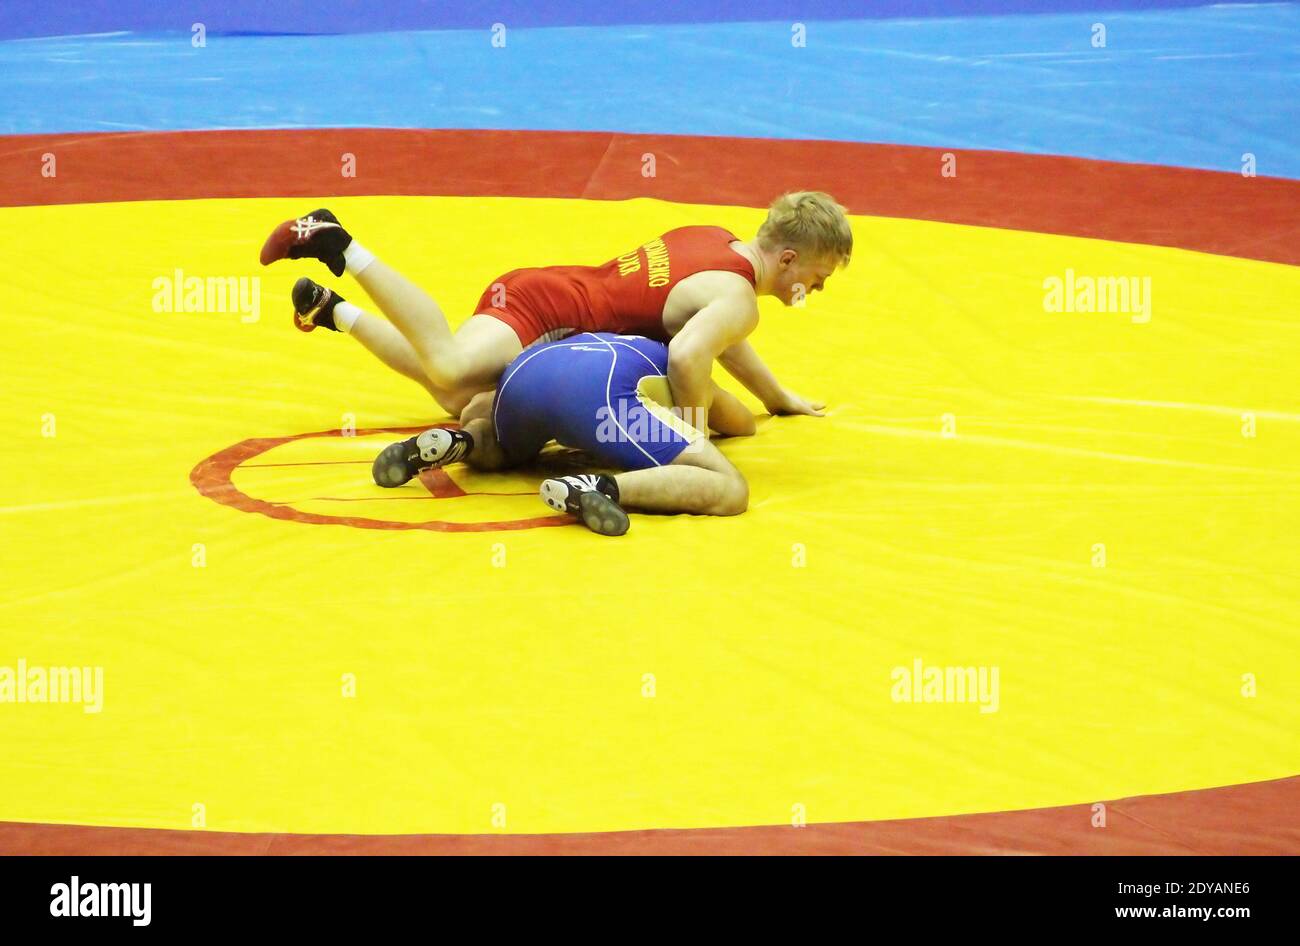 Wrestling Mat High Resolution Stock Photography and Images - Alamy